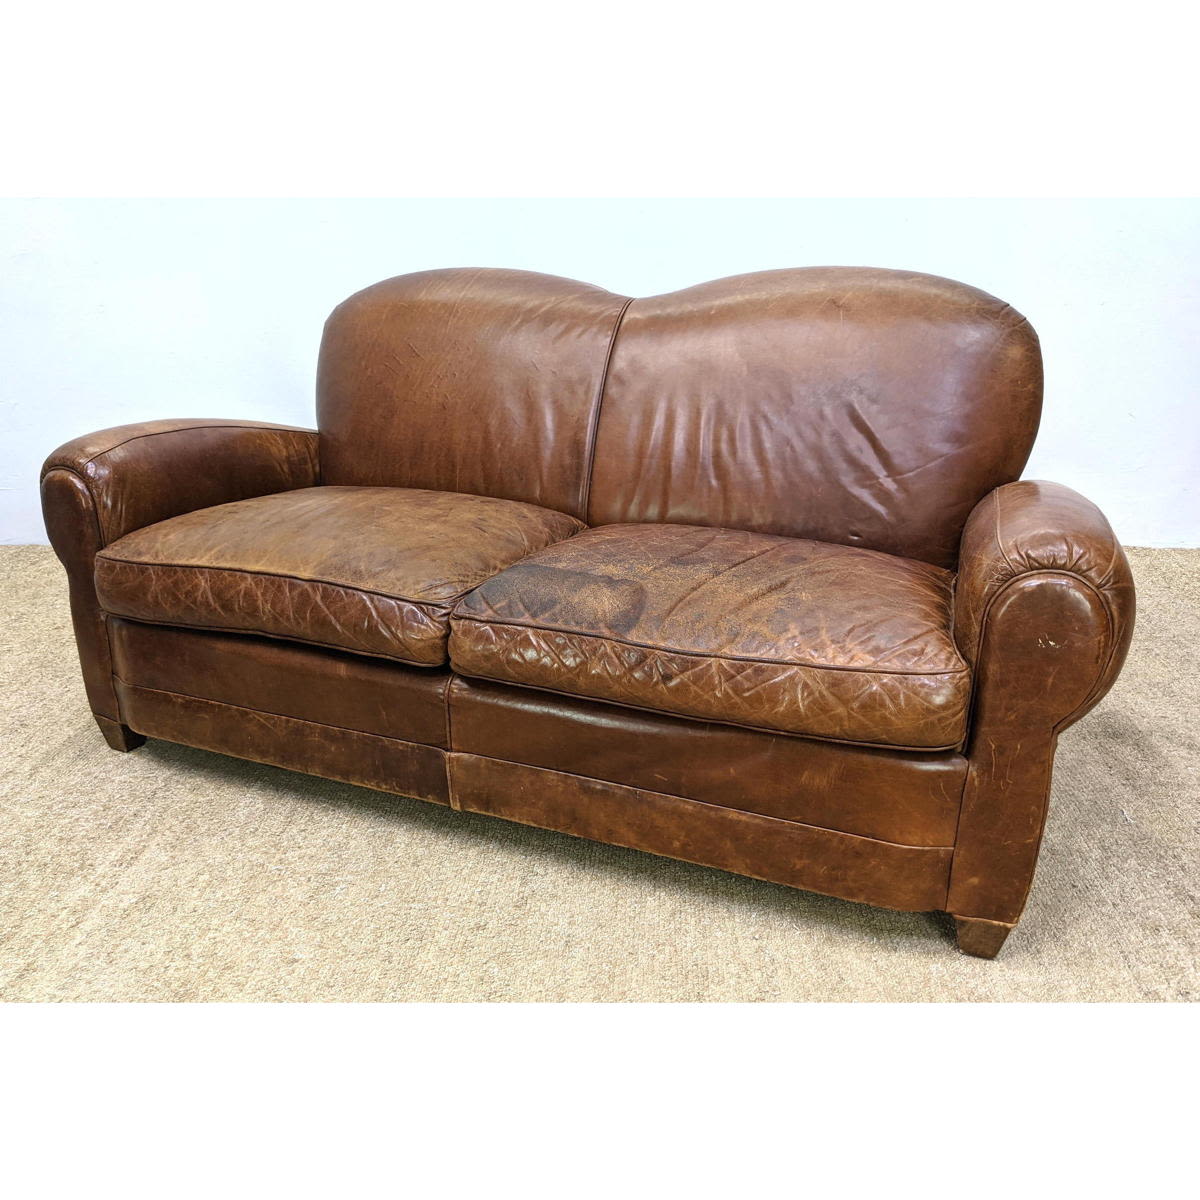 French style Leather Club Sofa 2bb076